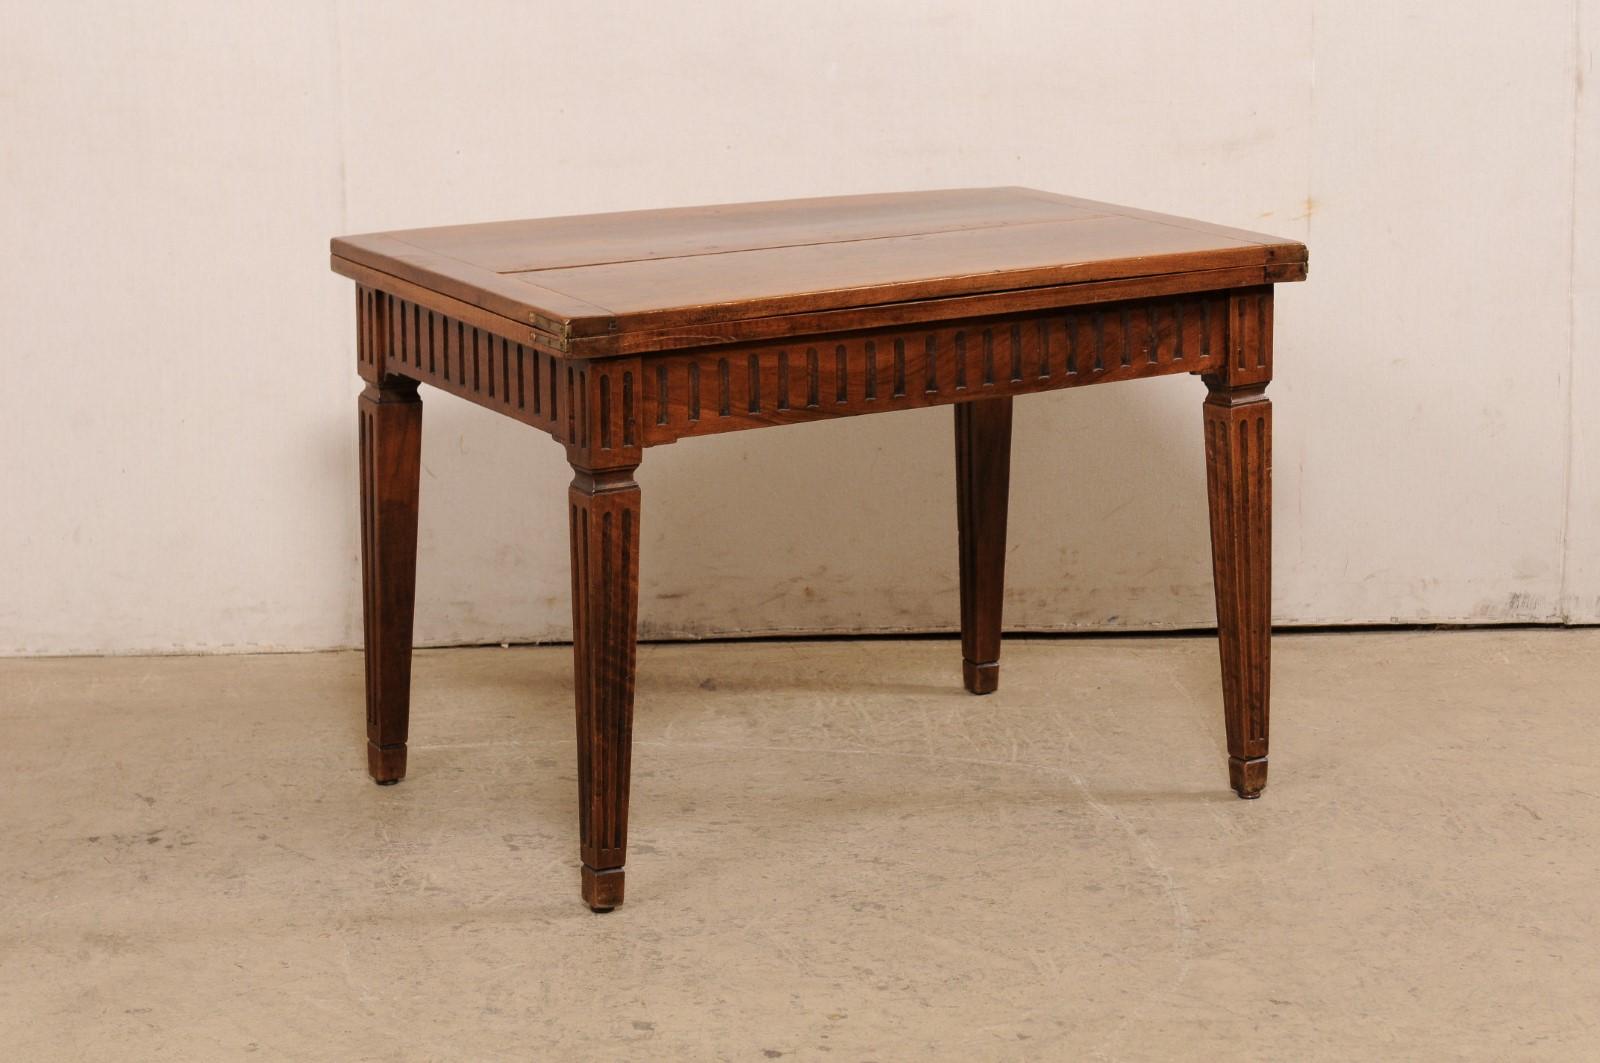 An Italian carved-wood table with transitional/fold out top from the early 20th century. This antique table from Italy features a bi-folding top that can be folded out and turned to create a more expansive table top. Flute carvings adorn the apron